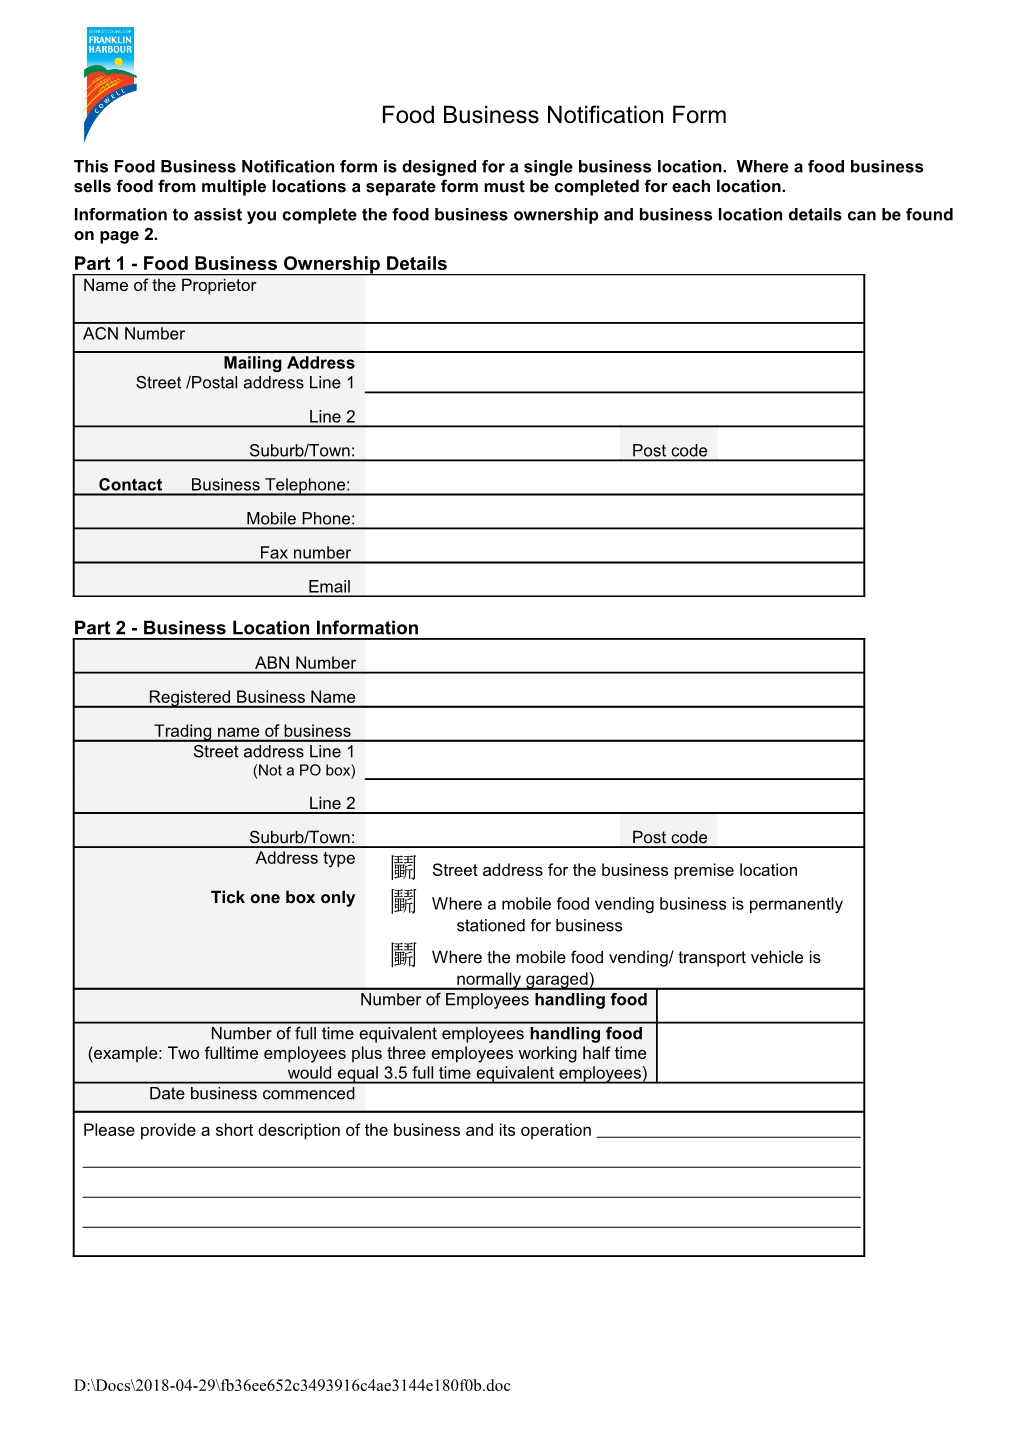 Food Business Notification Form